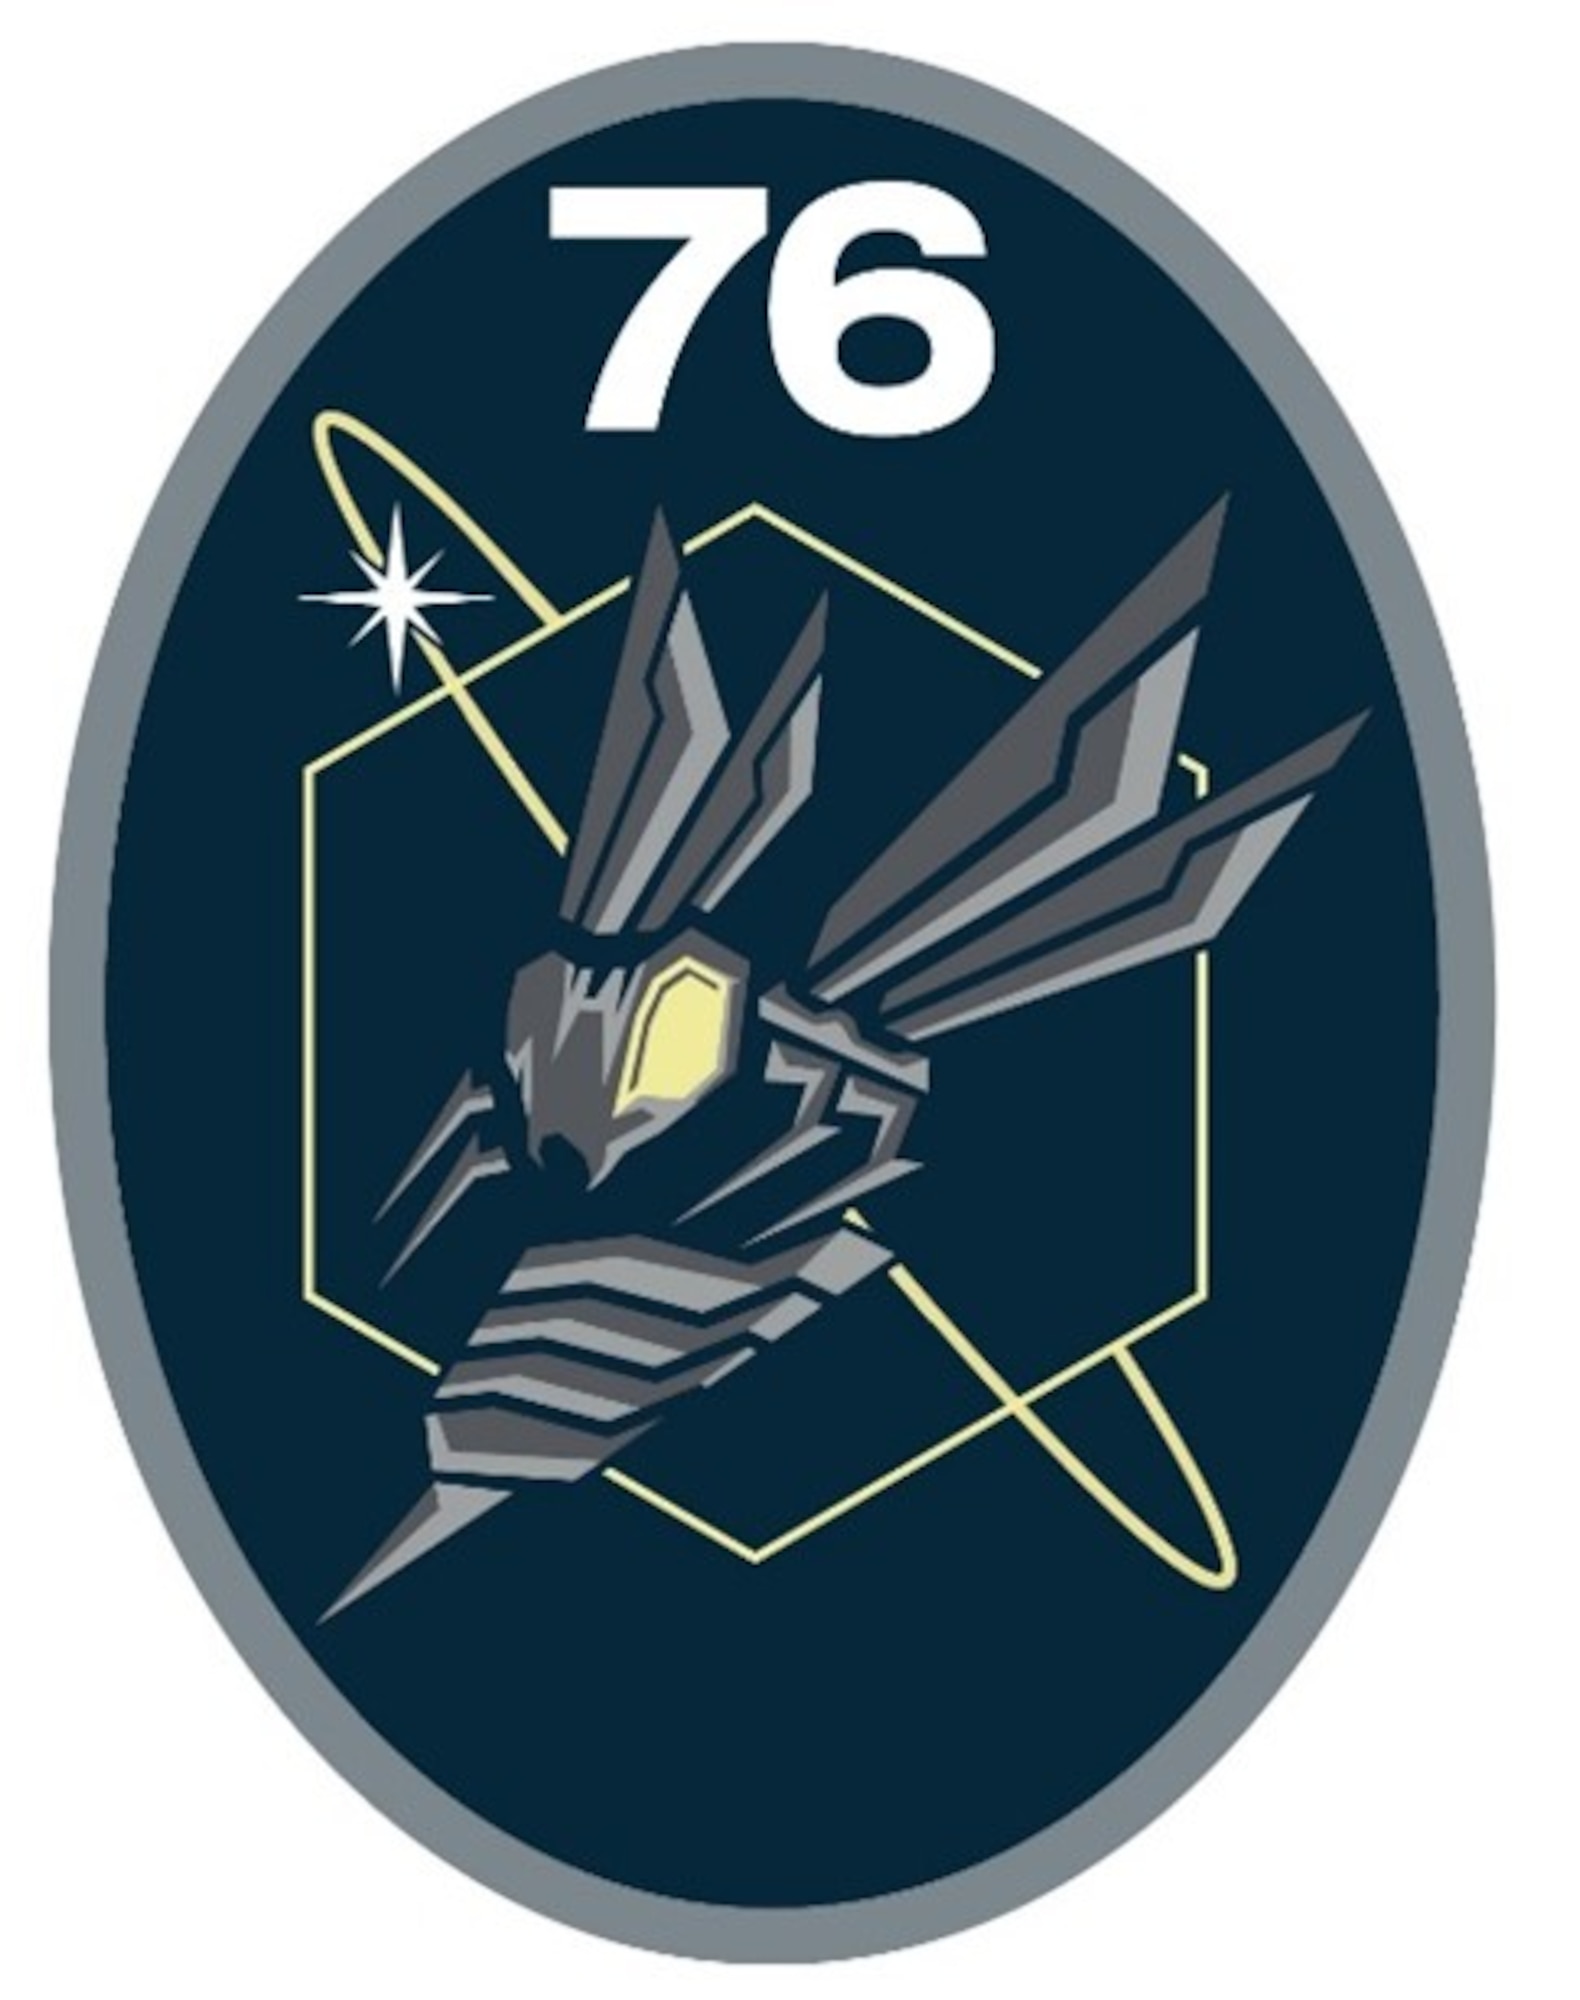 76th ISRS patch